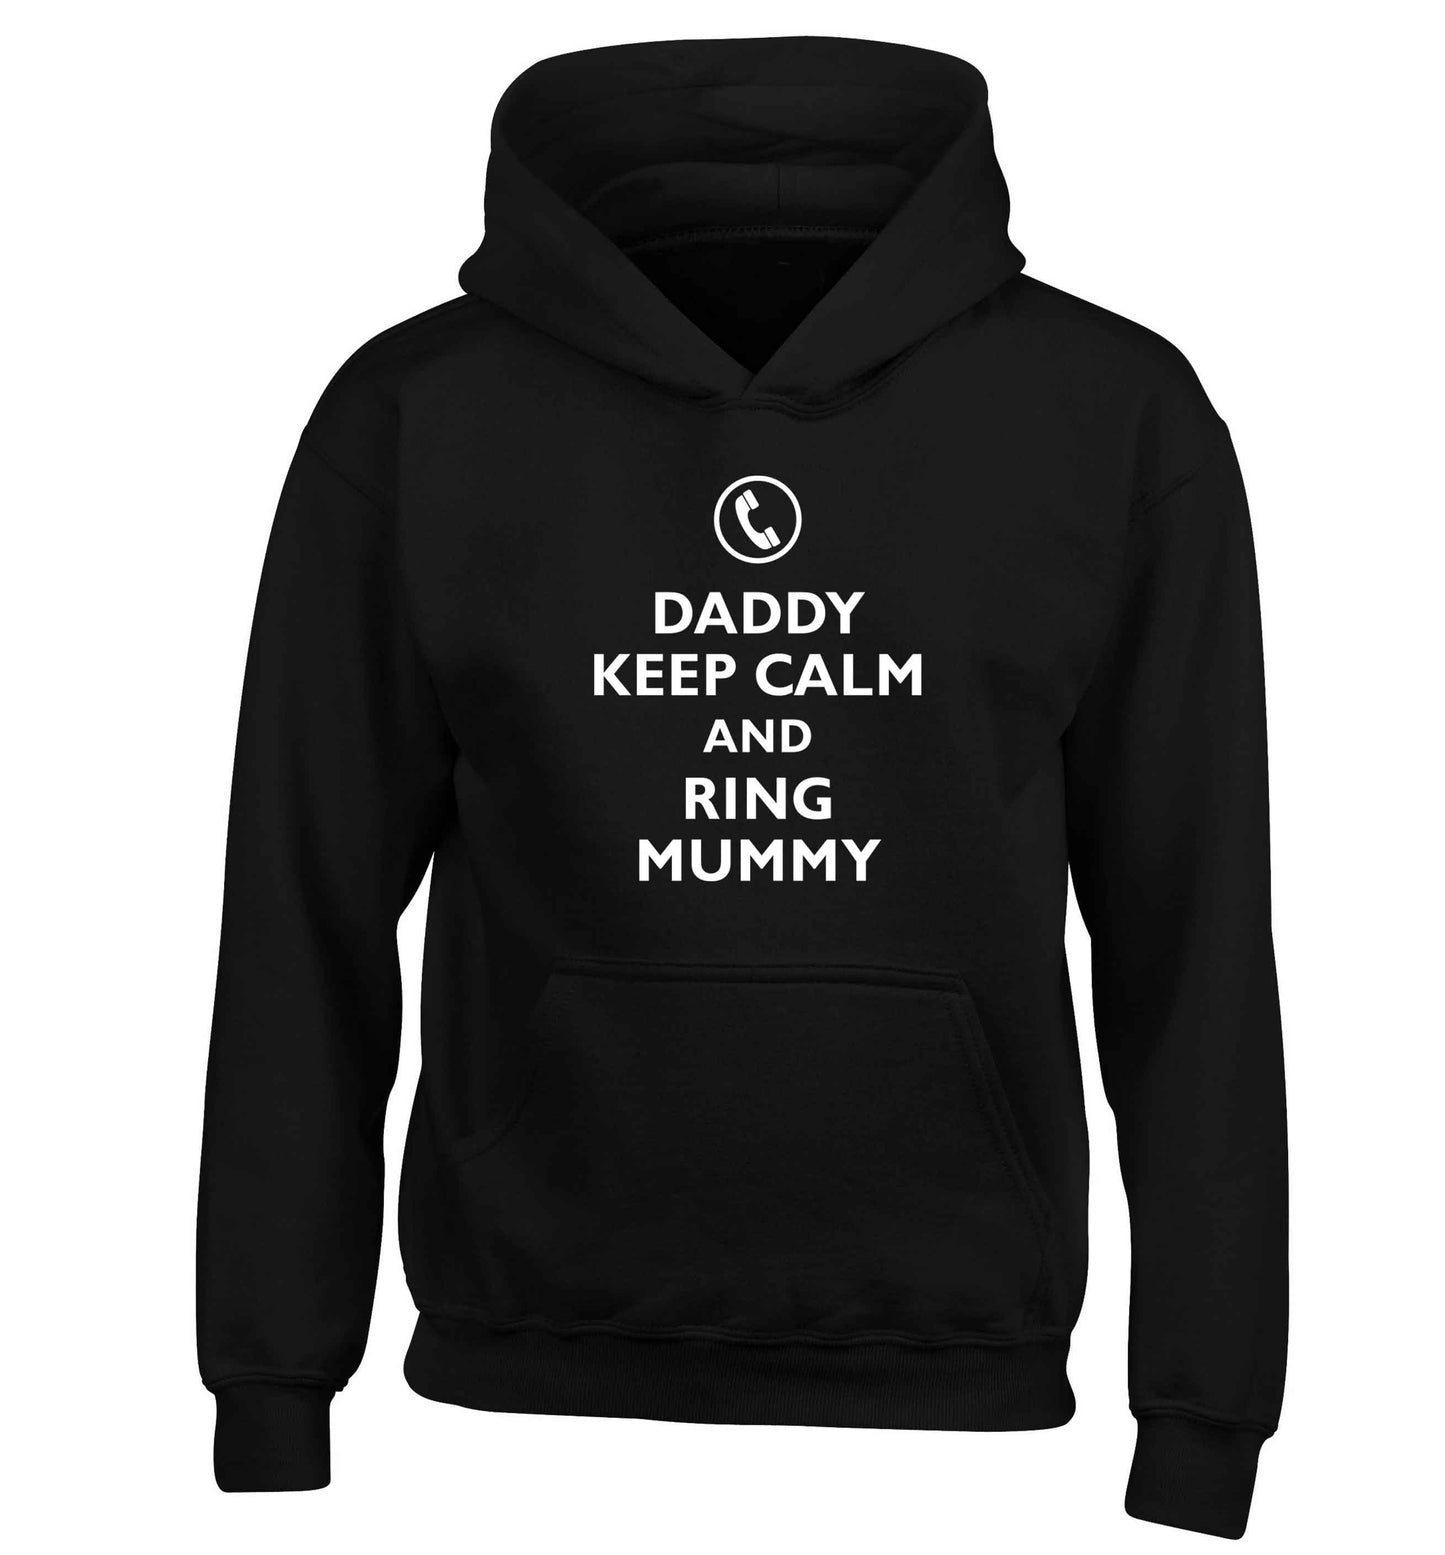 Daddy keep calm and ring mummy children's black hoodie 12-13 Years